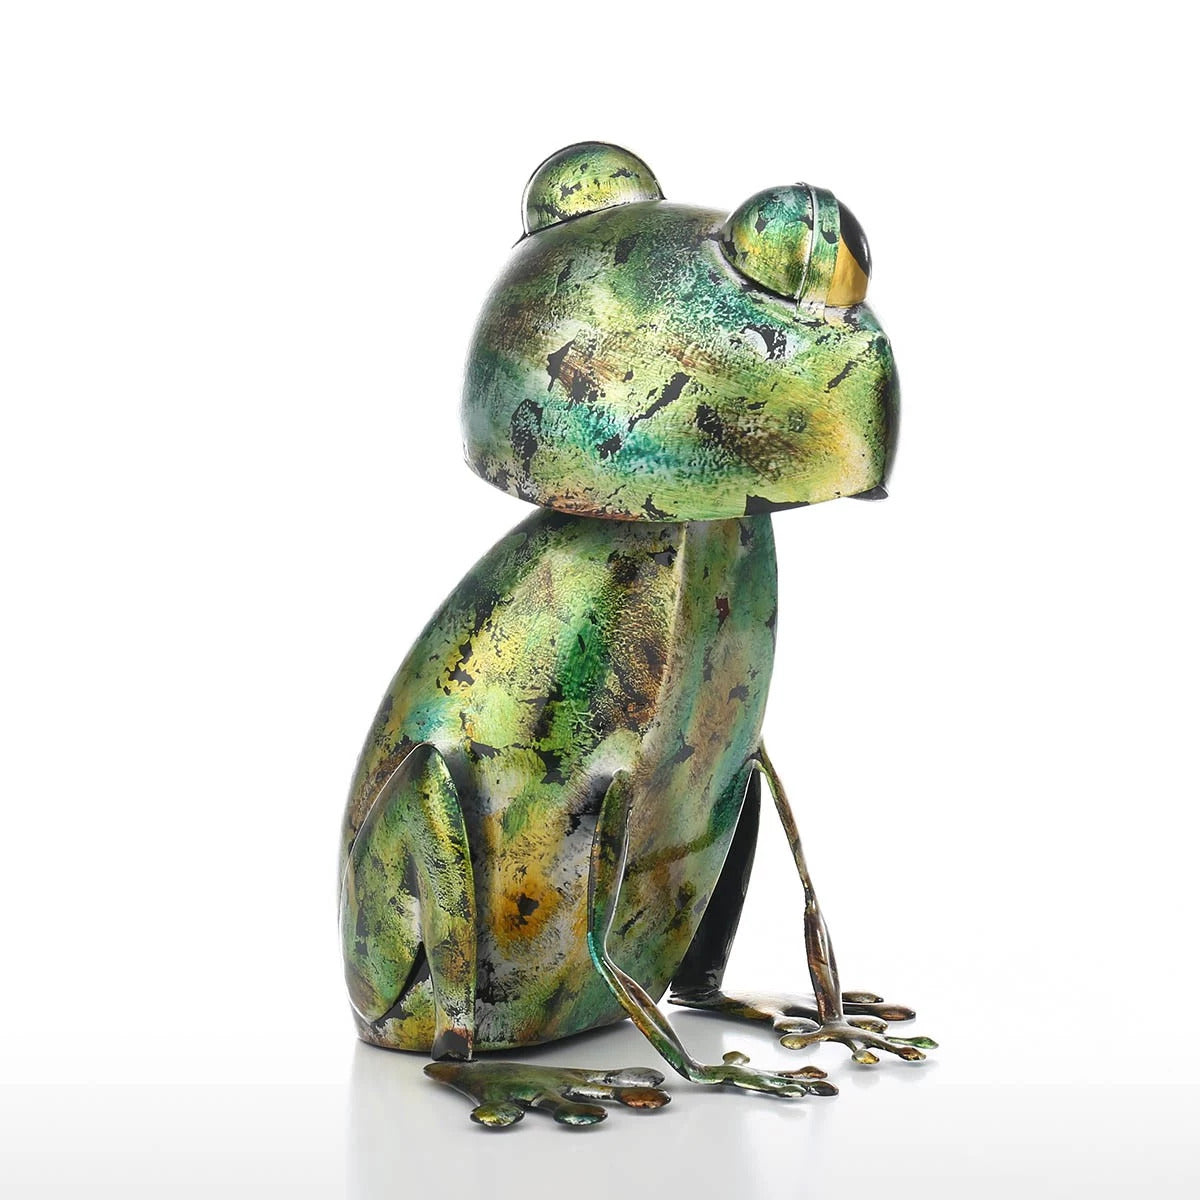 Bullfrog and Green Metal Frog Statue and Sculpture to Decorative Ornaments and Gifts